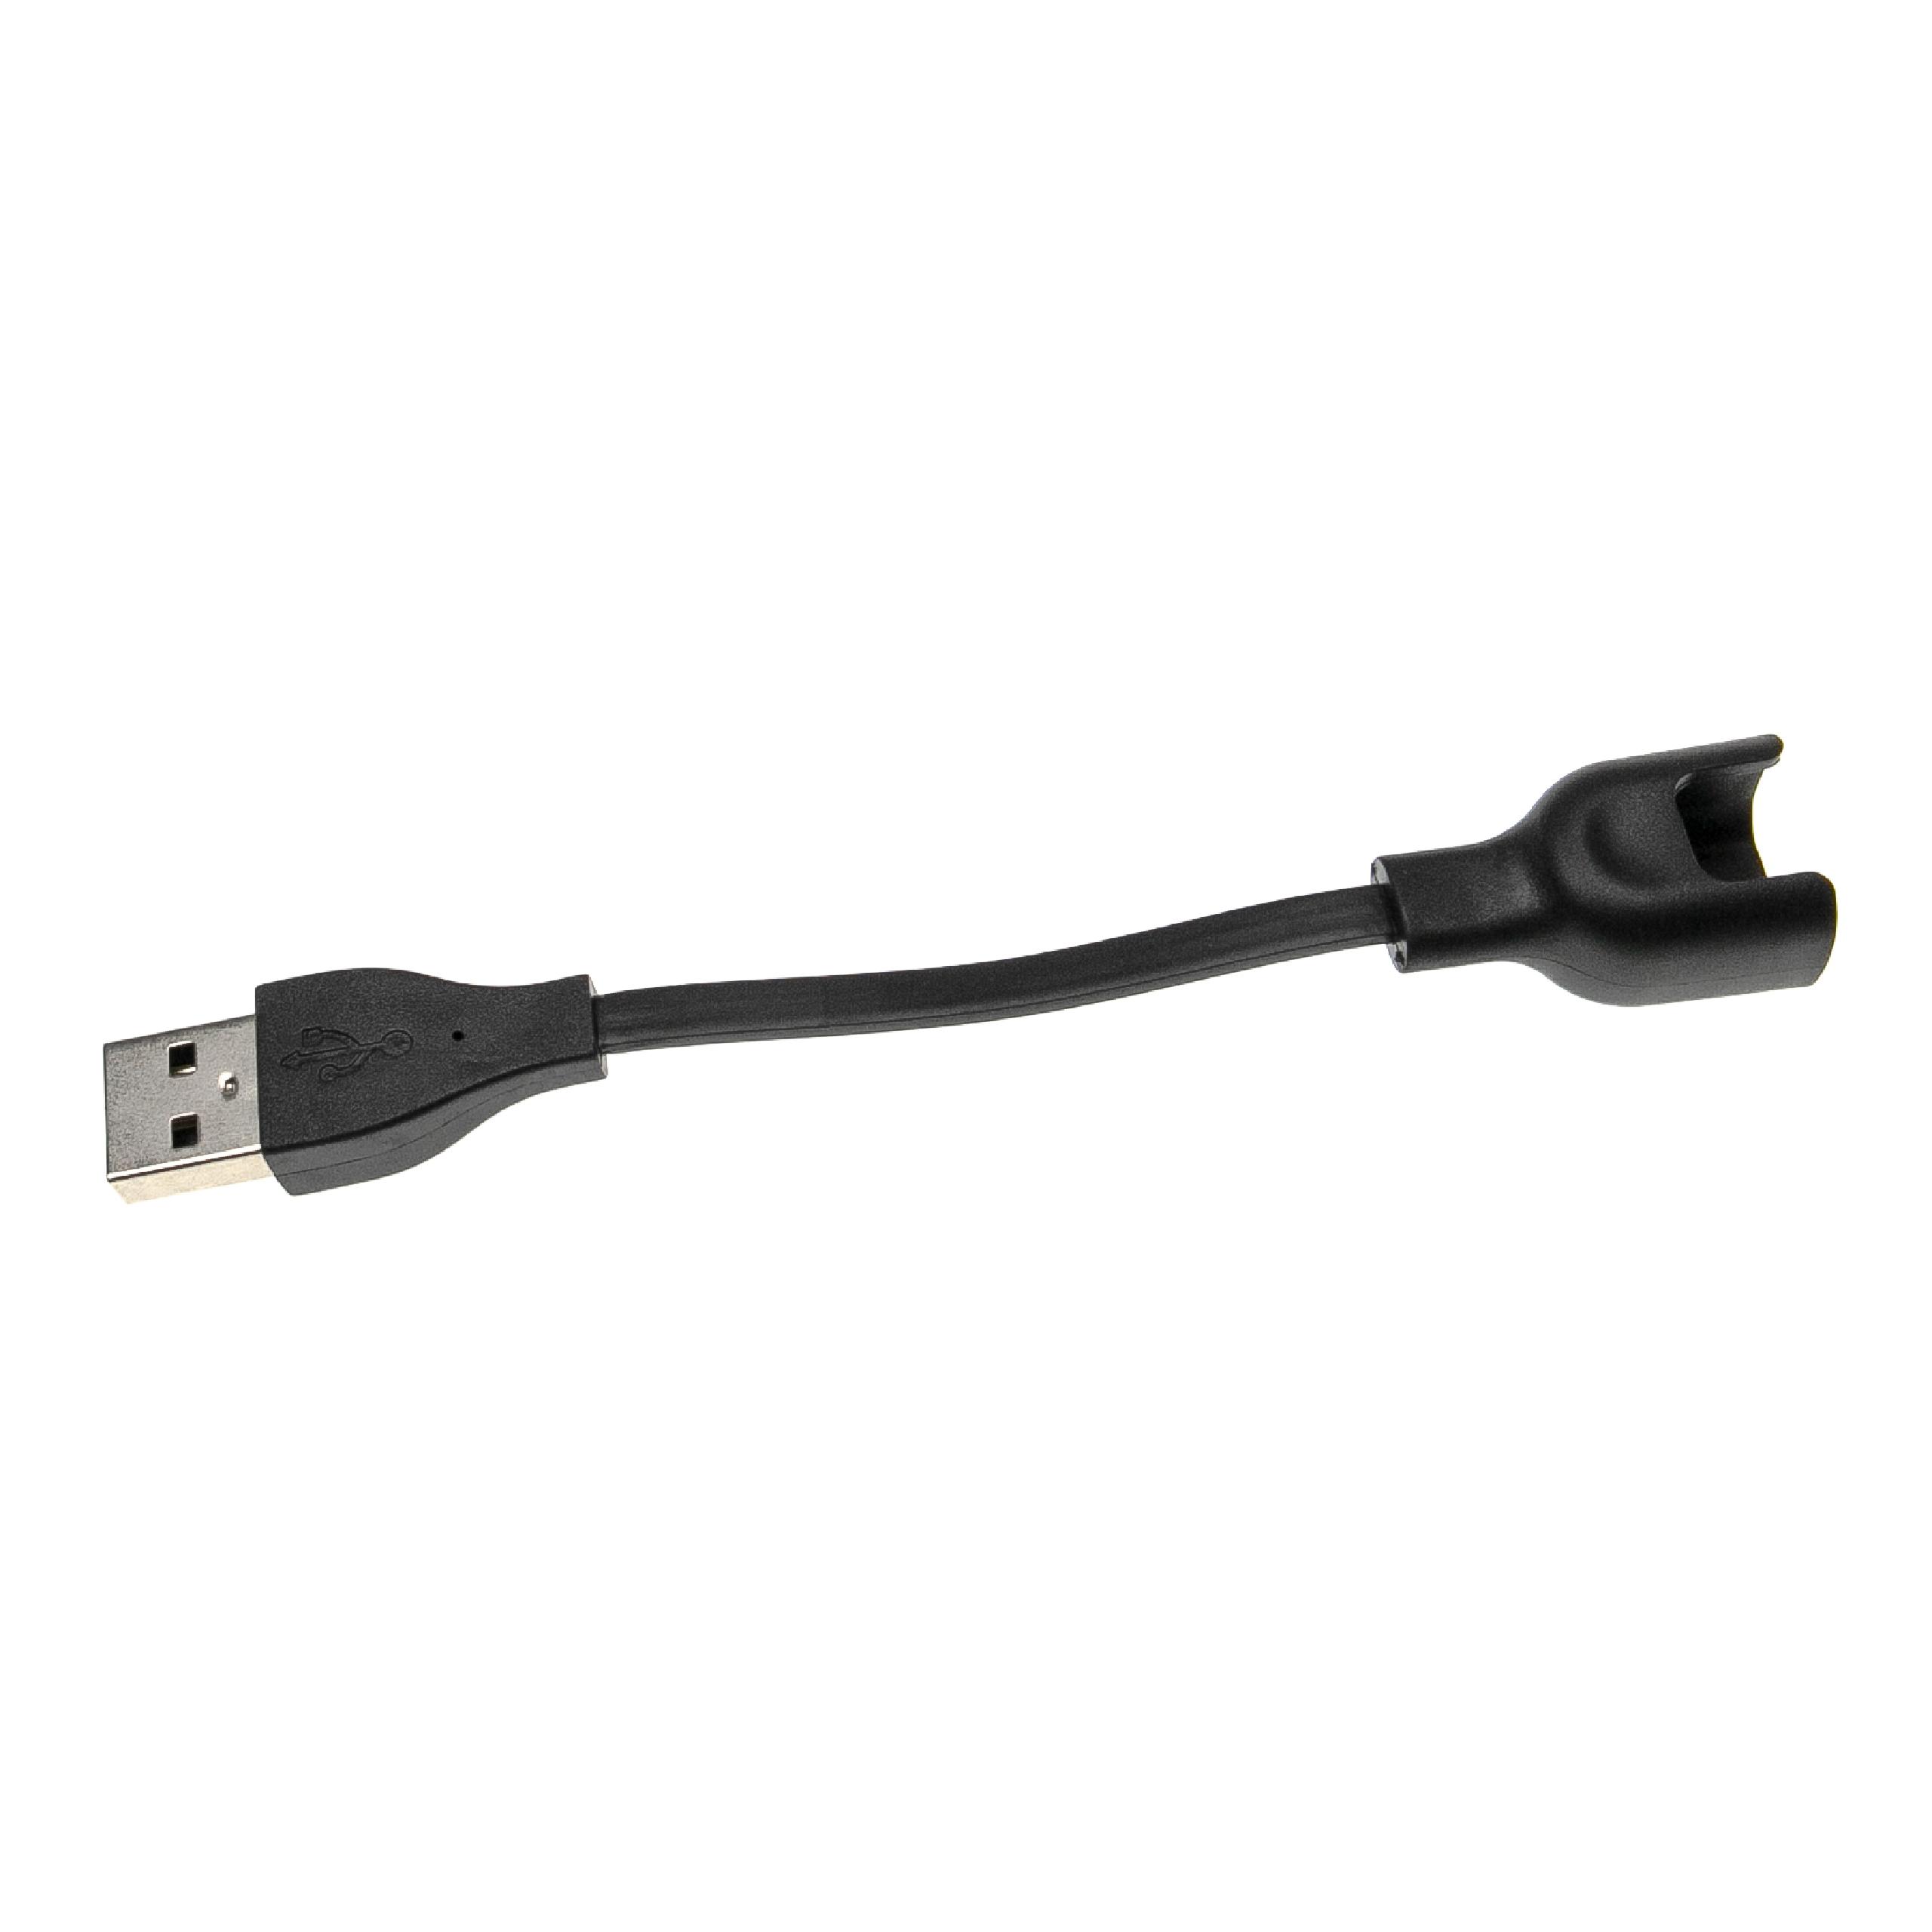 Charging Cable suitable for 4, 5, 3e, 4e Huawei Honor Fitness Tracker - Cable, 12.5cm, black